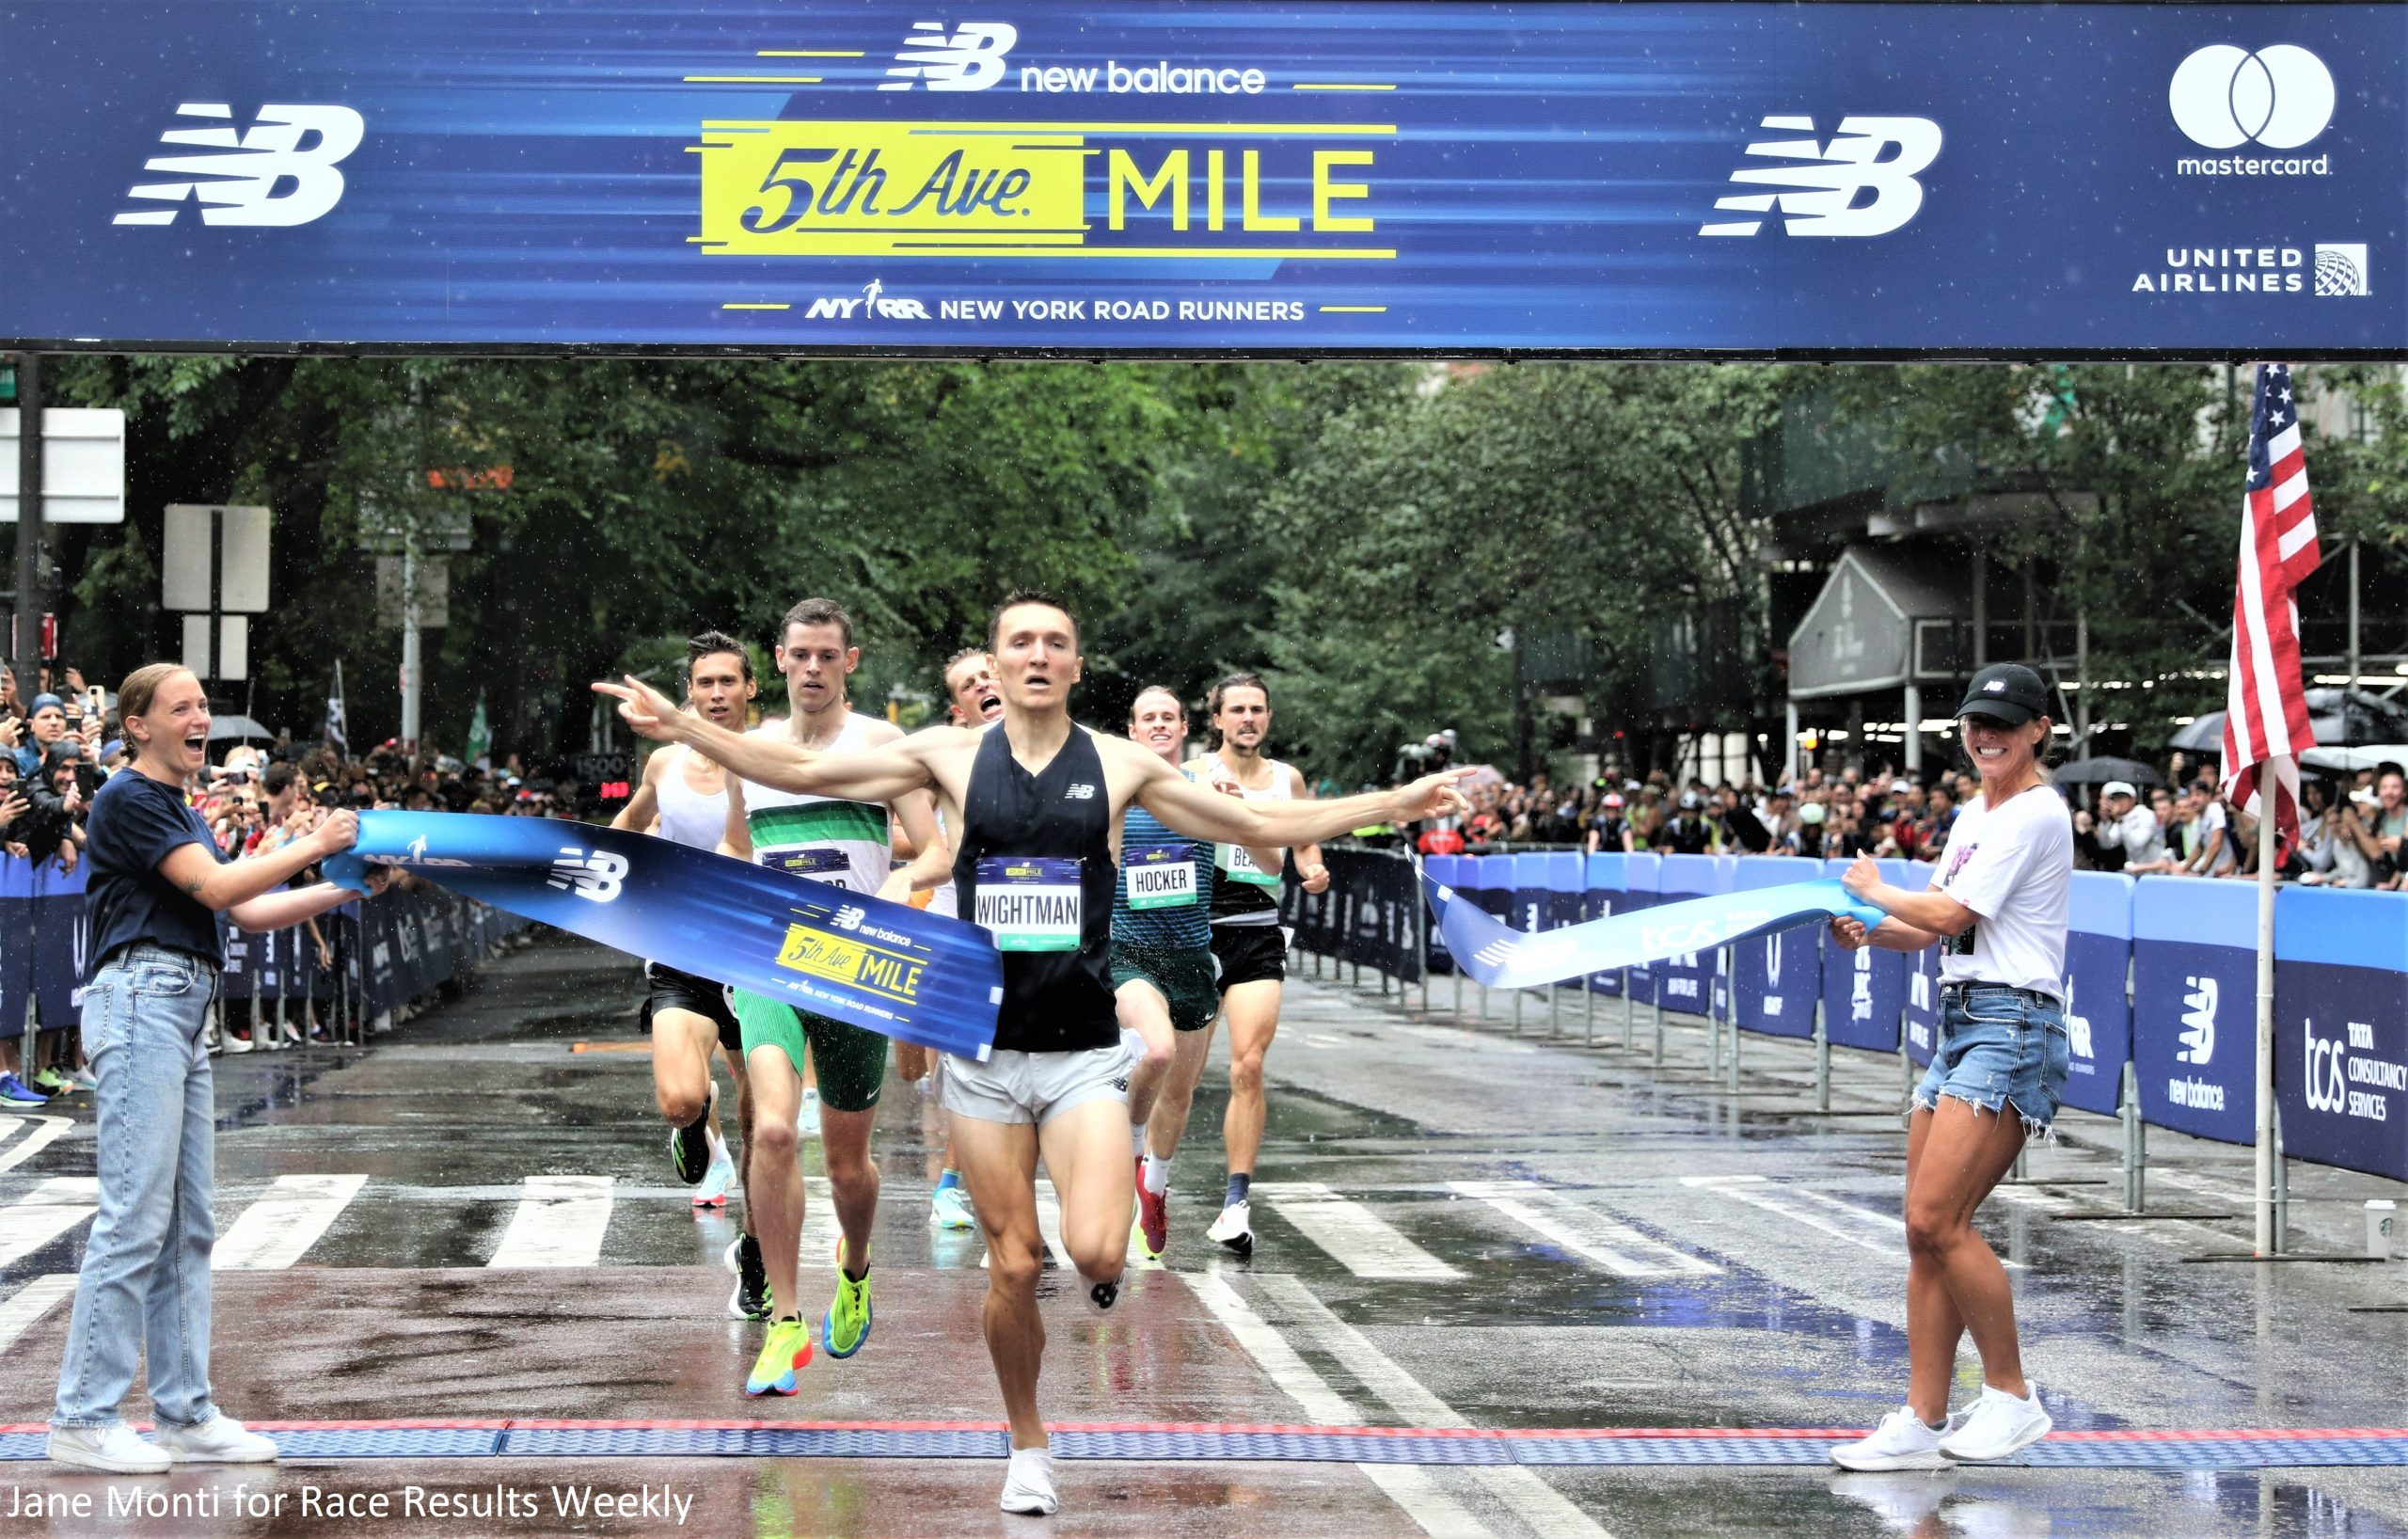 Jake Wightman of Great Britain wins the 2022 New Balance Fifth Avenue Mile in 3:49.6 to take his third victory in the event (photo by Jane Monti for Race Results Weekly)